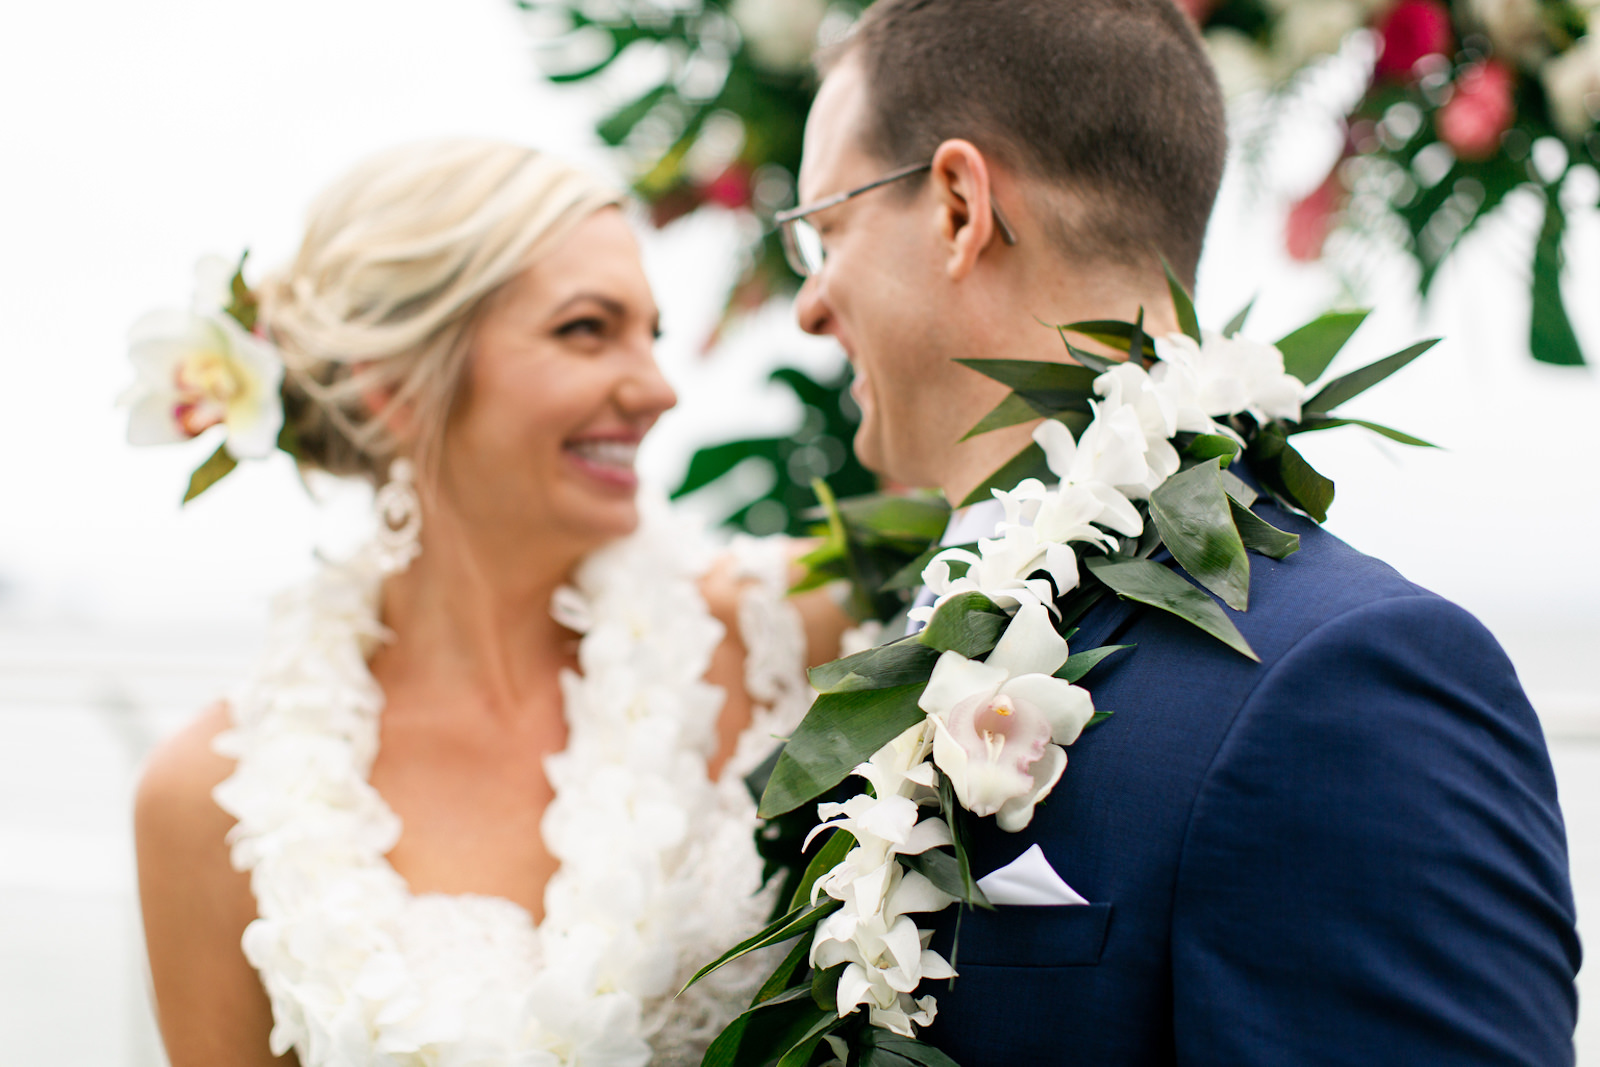 Tropical Elegant Bride and Groom Wearing Floral Leighs with White Flowers and Green Palm Tree Leaves